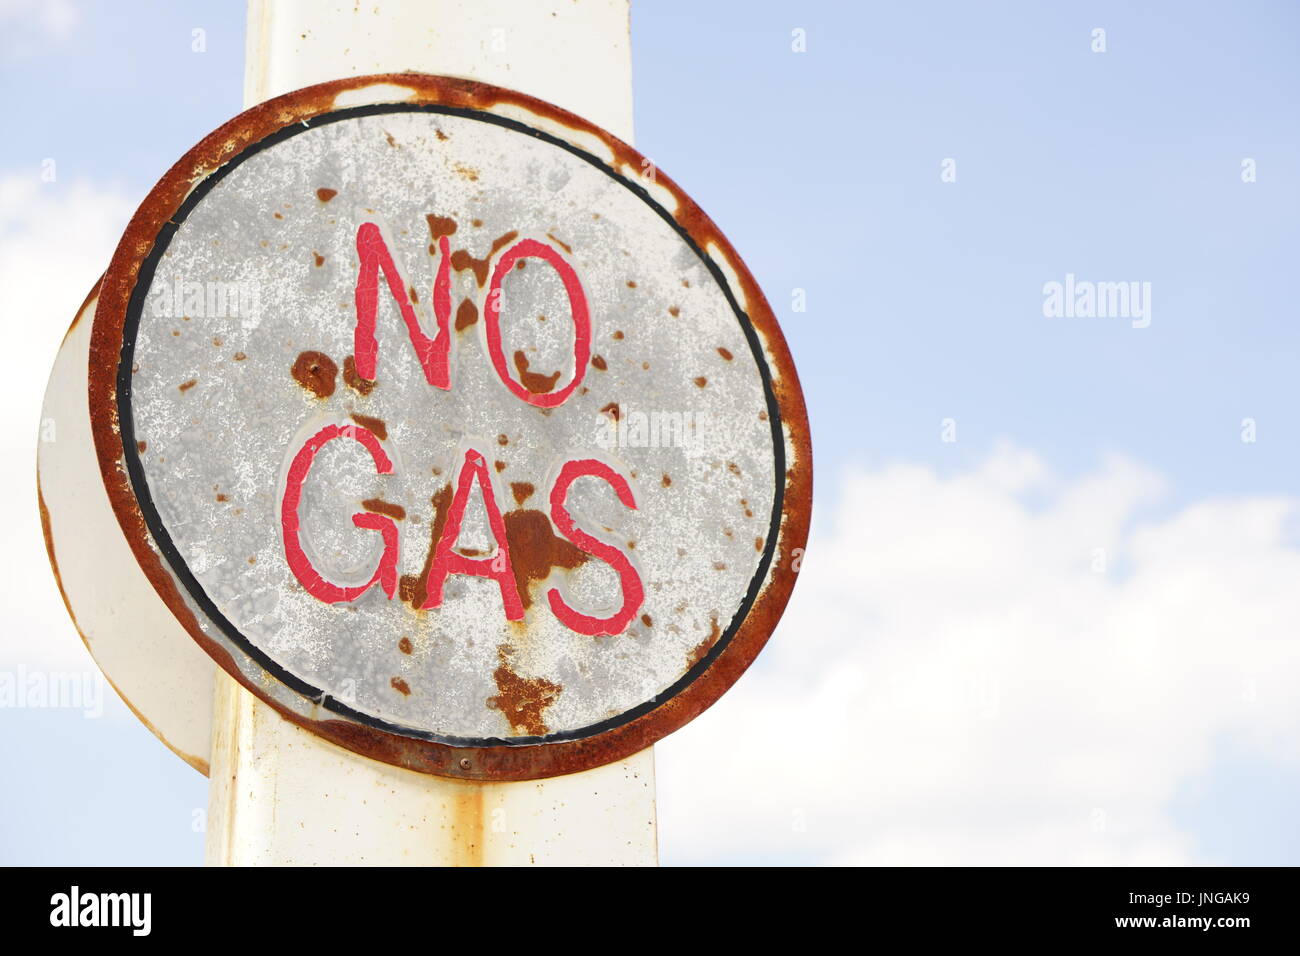 No gas sign hires stock photography and images Alamy